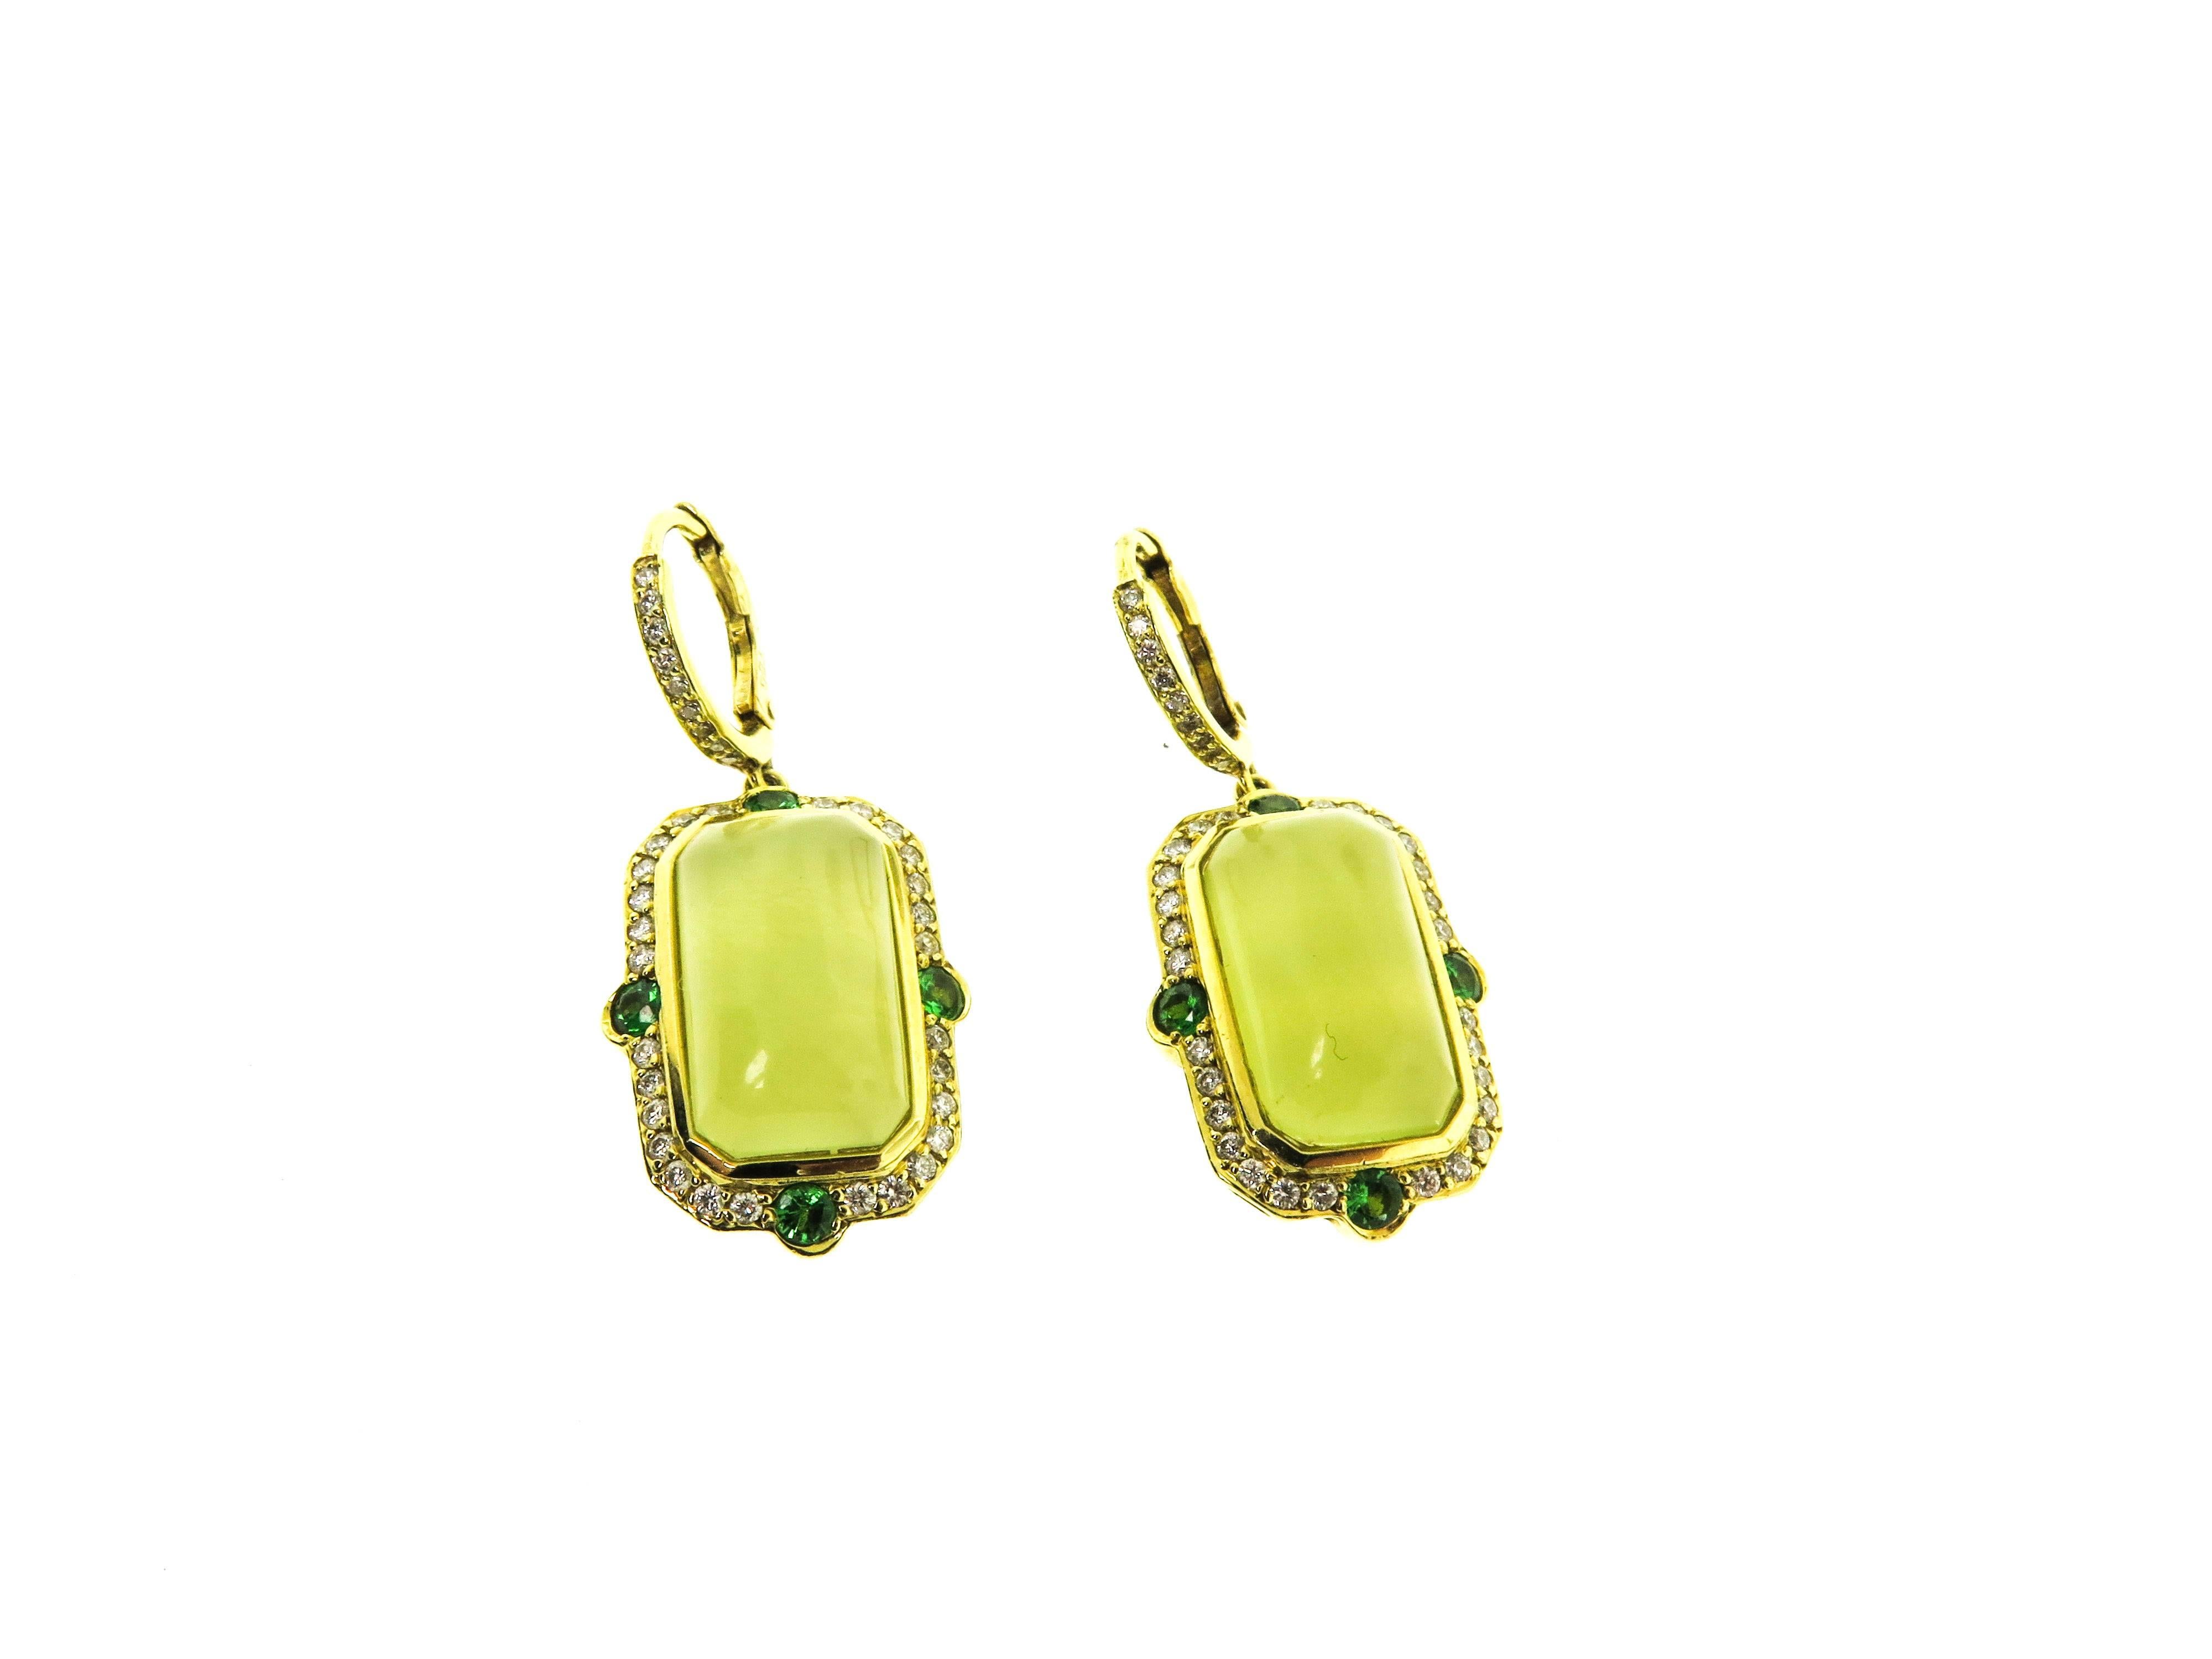 These elegant earrings exhibit a distinctive green hue, the rarest and most valuable color in which to find one of these legendary stones. The cabochon cut  green Beryl is framed by approximately 0.84 carat of micropavé-set diamonds and 0.80 carat